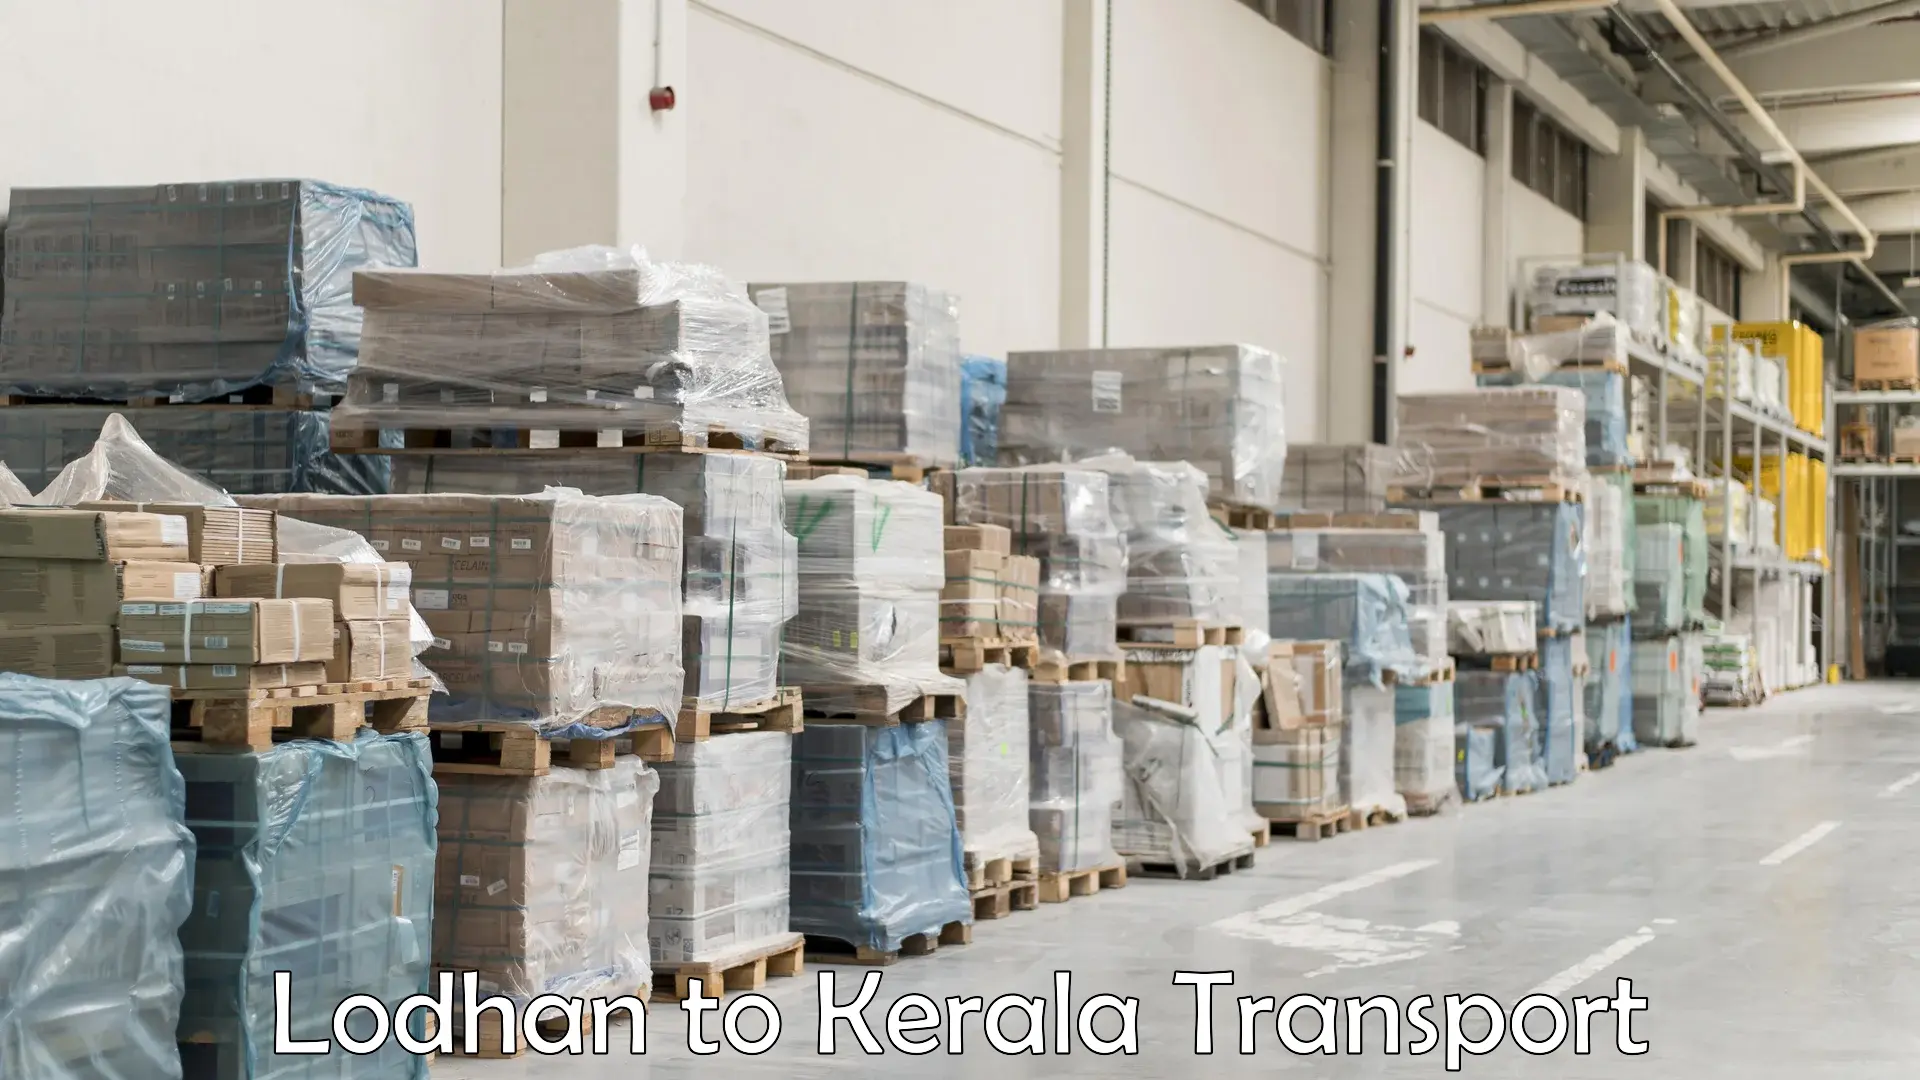 Cycle transportation service Lodhan to Trivandrum